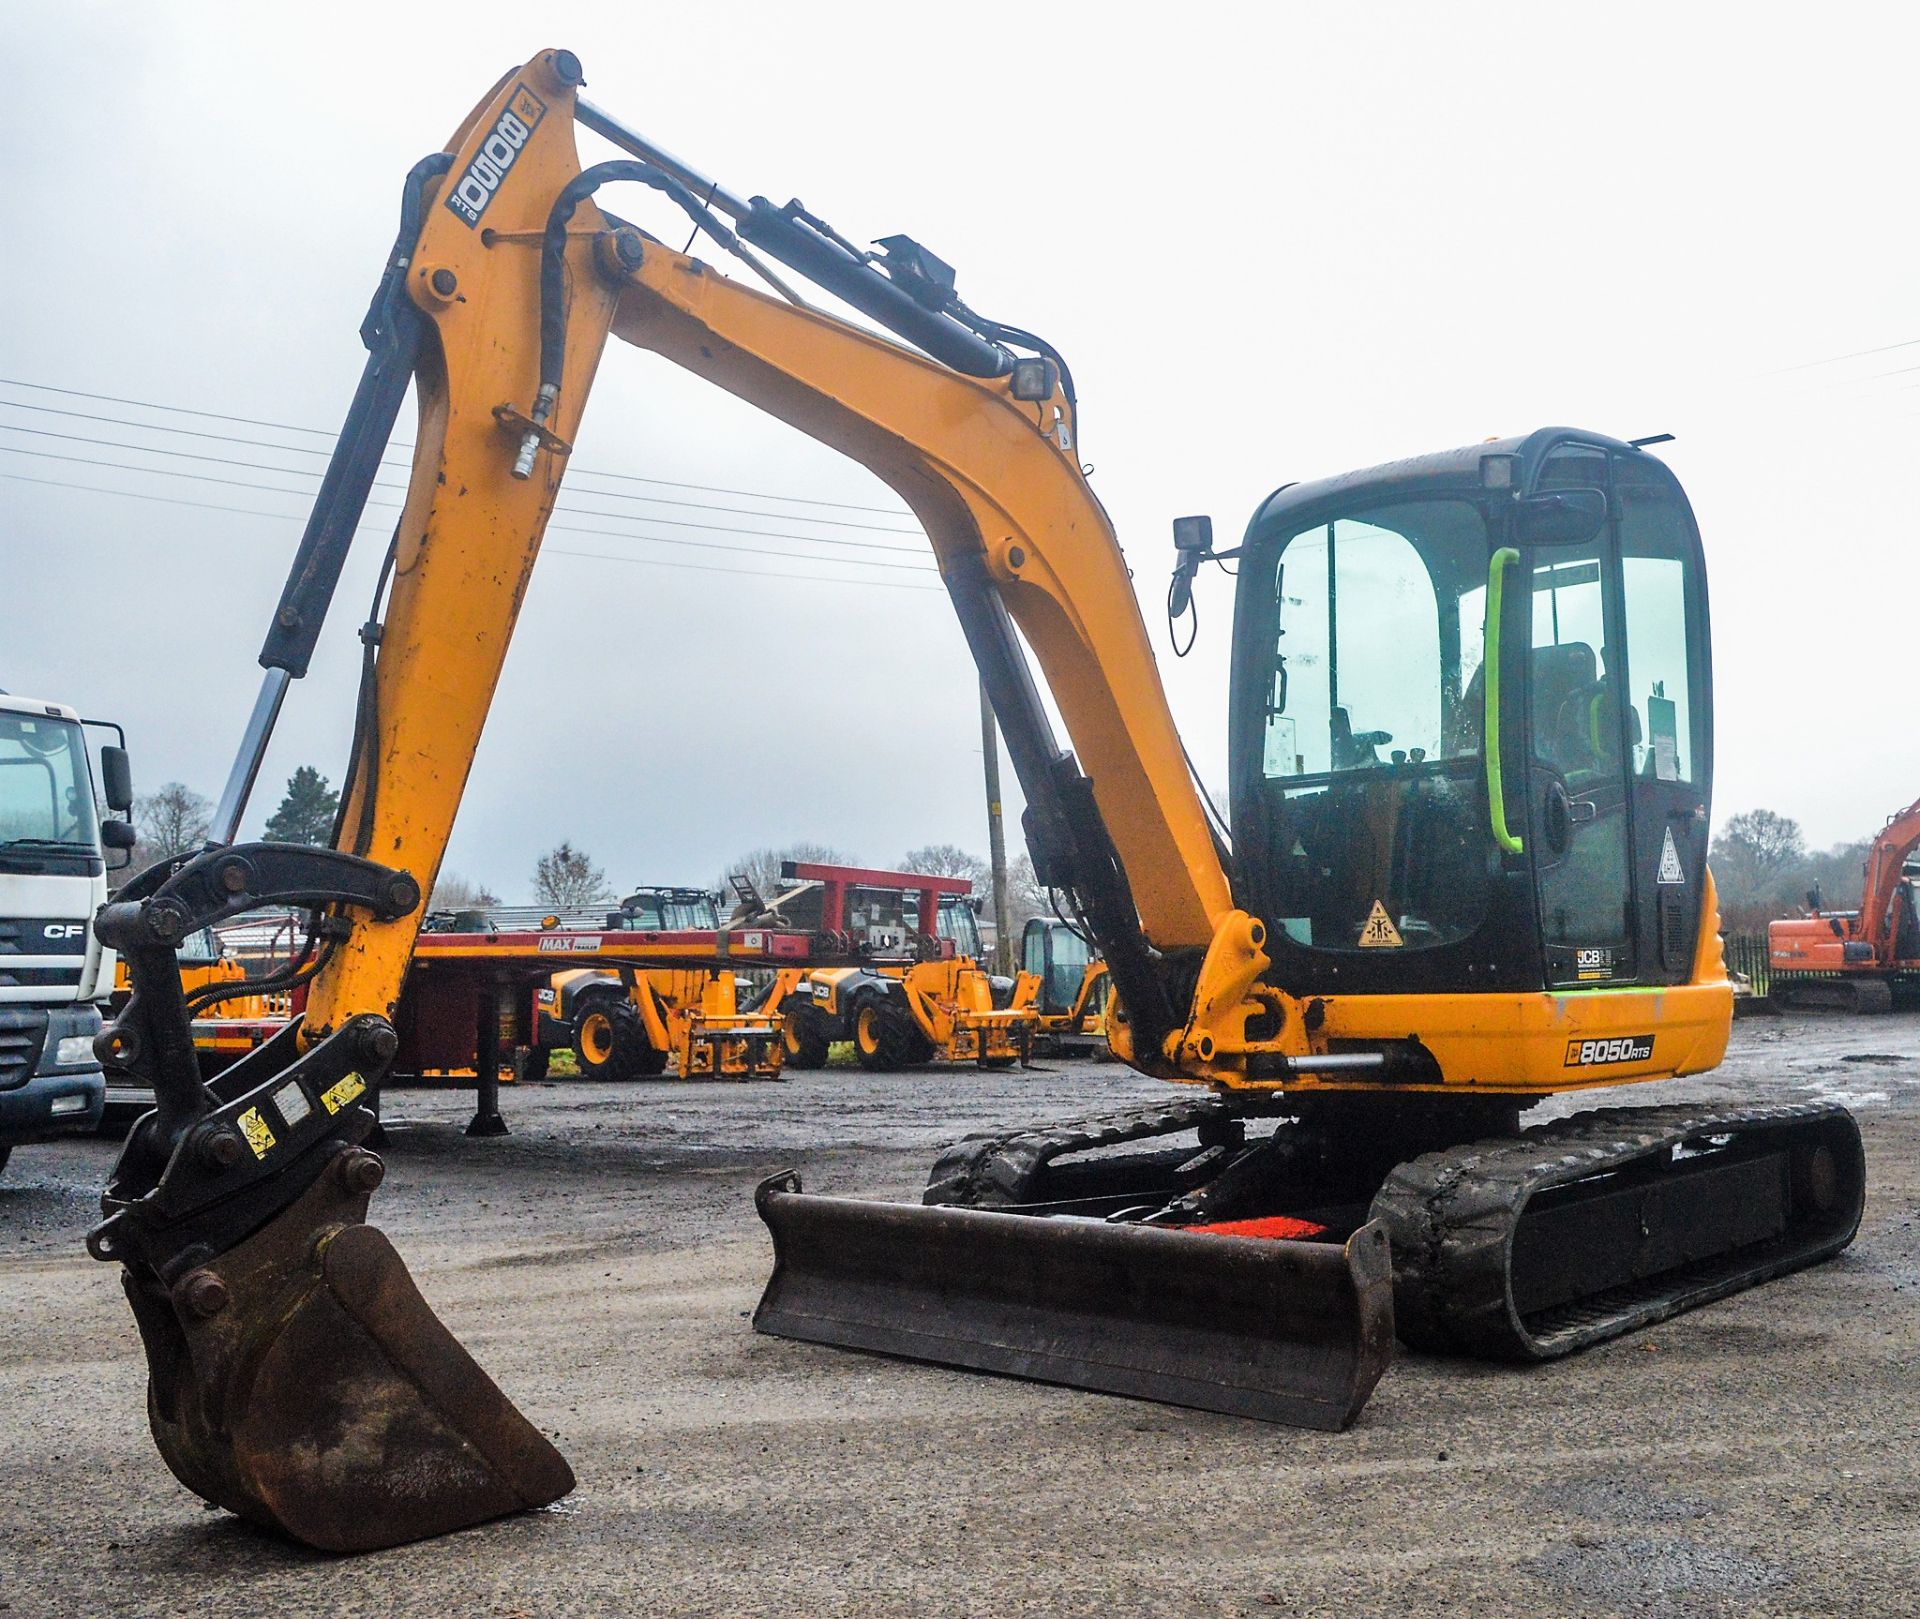 JCB 8050 RTS 5 tonne rubber tracked excavator Year: 2013 S/N: 1741893 Recorded Hours: 1756 blade,